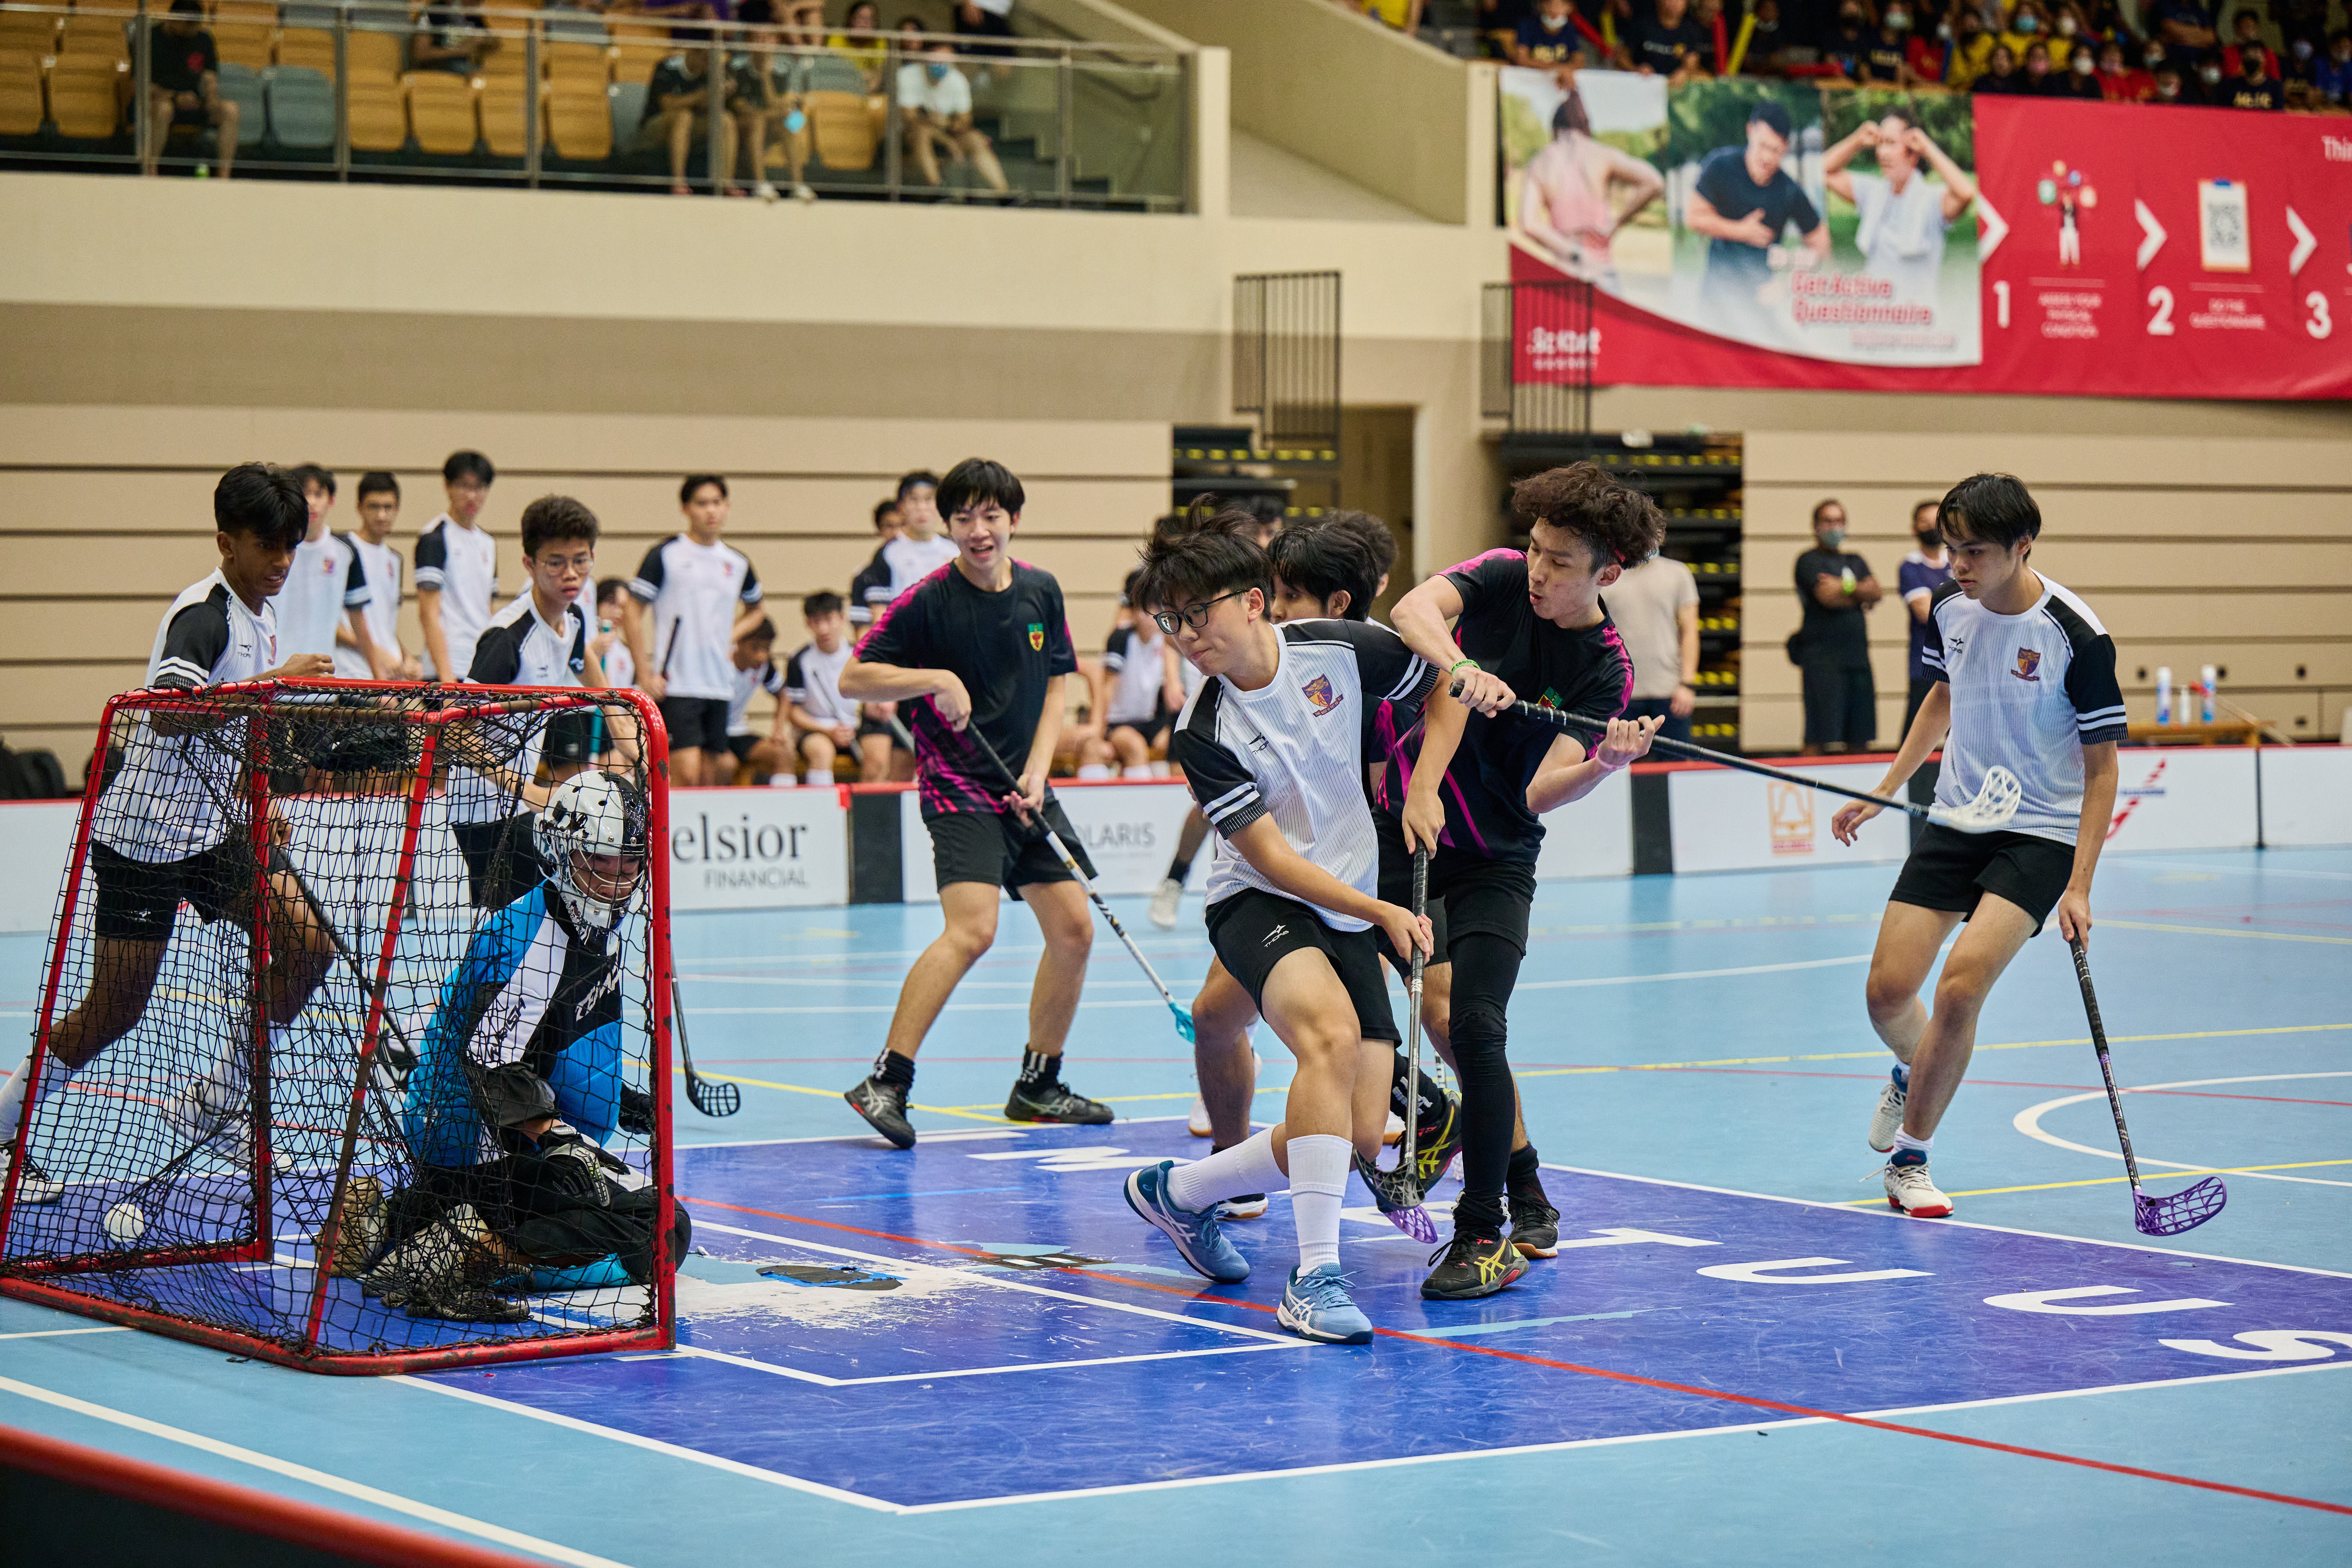 20220519_20220519 SSSC Floorball National A Div Boys Semi Finals Raffles Junior College Vs Anglo-Chinese Junior College_Siaw Woon Chong_0046